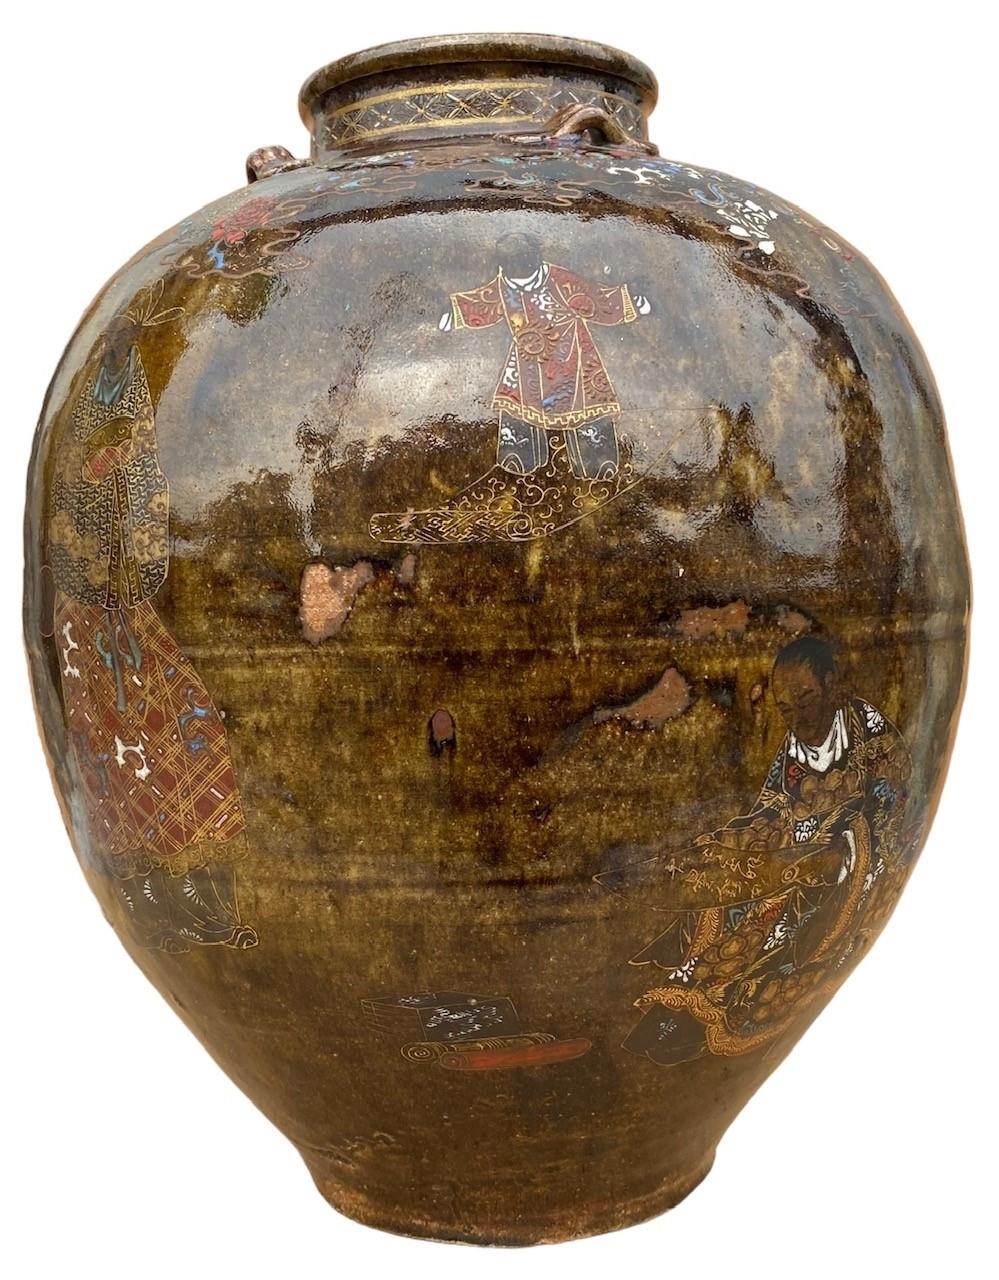 A LARGE 19TH CENTURY JAPANESE TEA JAR Decorated with painted enamel, gold figures and flowers,